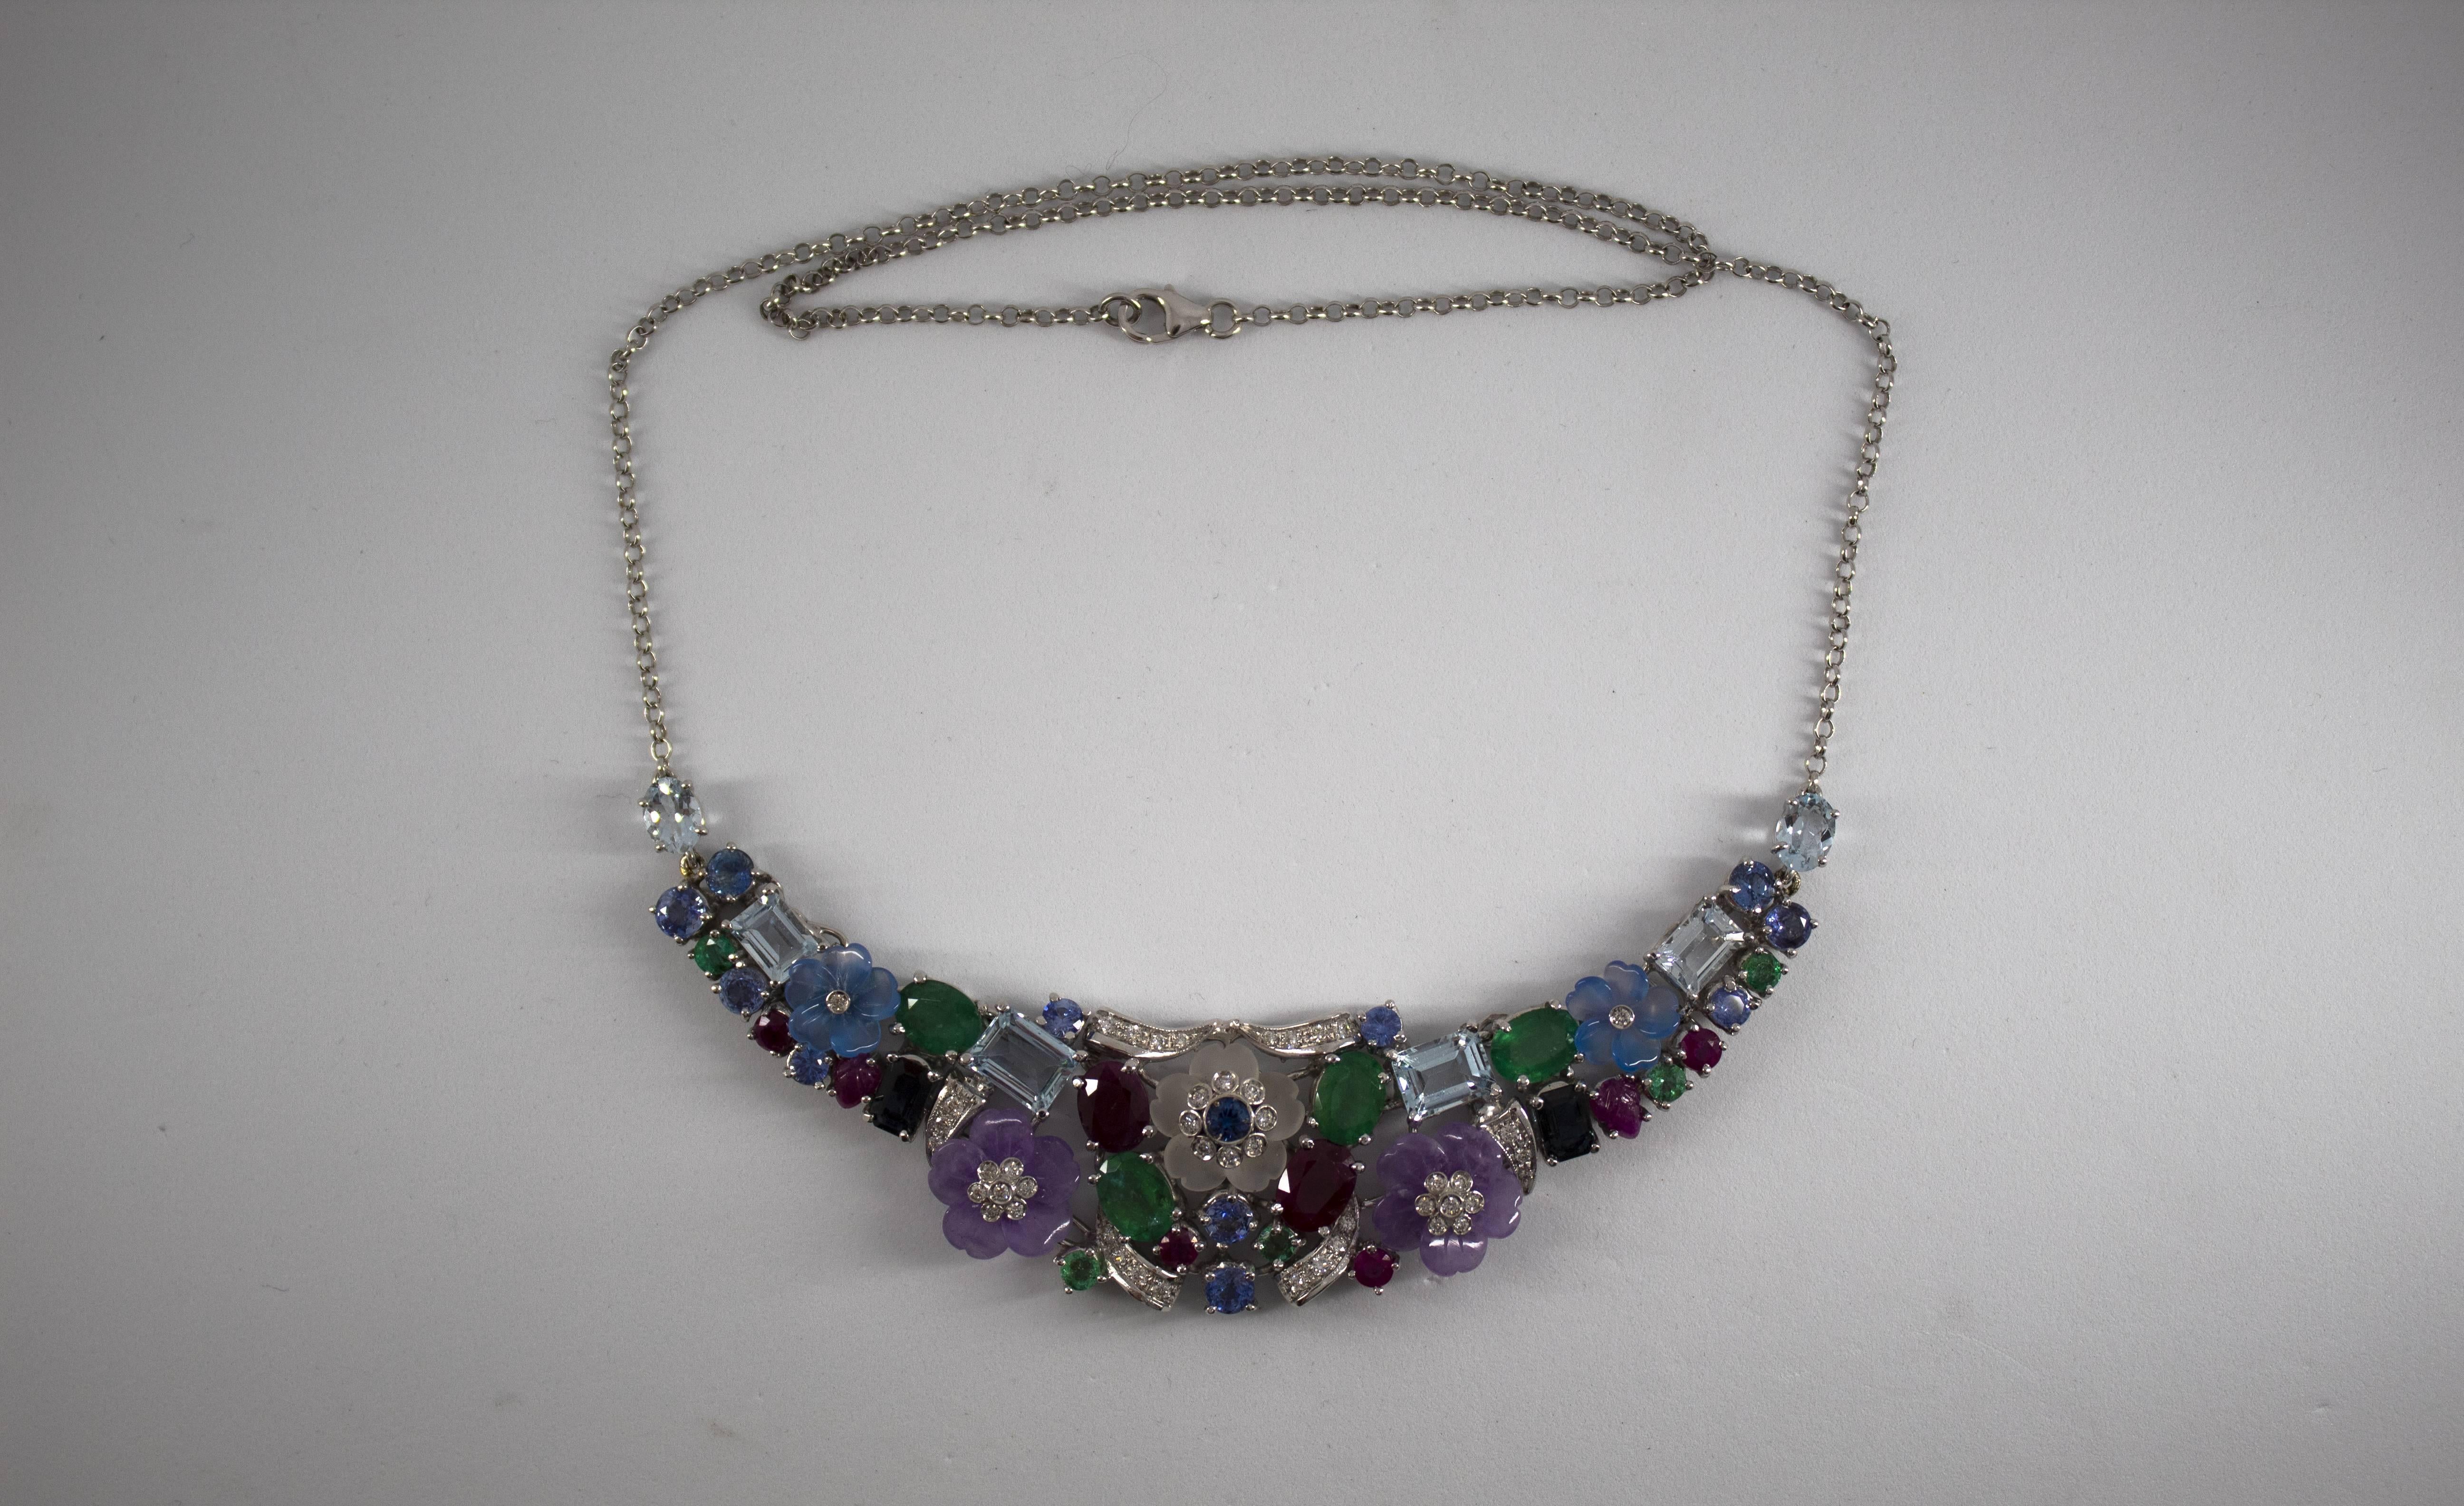 This Necklace is made of 18K White Gold.
This Necklace has 0.60 Carats of Diamonds.
This Necklace has 24.30 Carats of Sapphires, Rubies, Emeralds and Aquamarines.
This Necklace has Agate, Amethyst and Rock Crystal.
The Necklace Length is 50cm.
We're